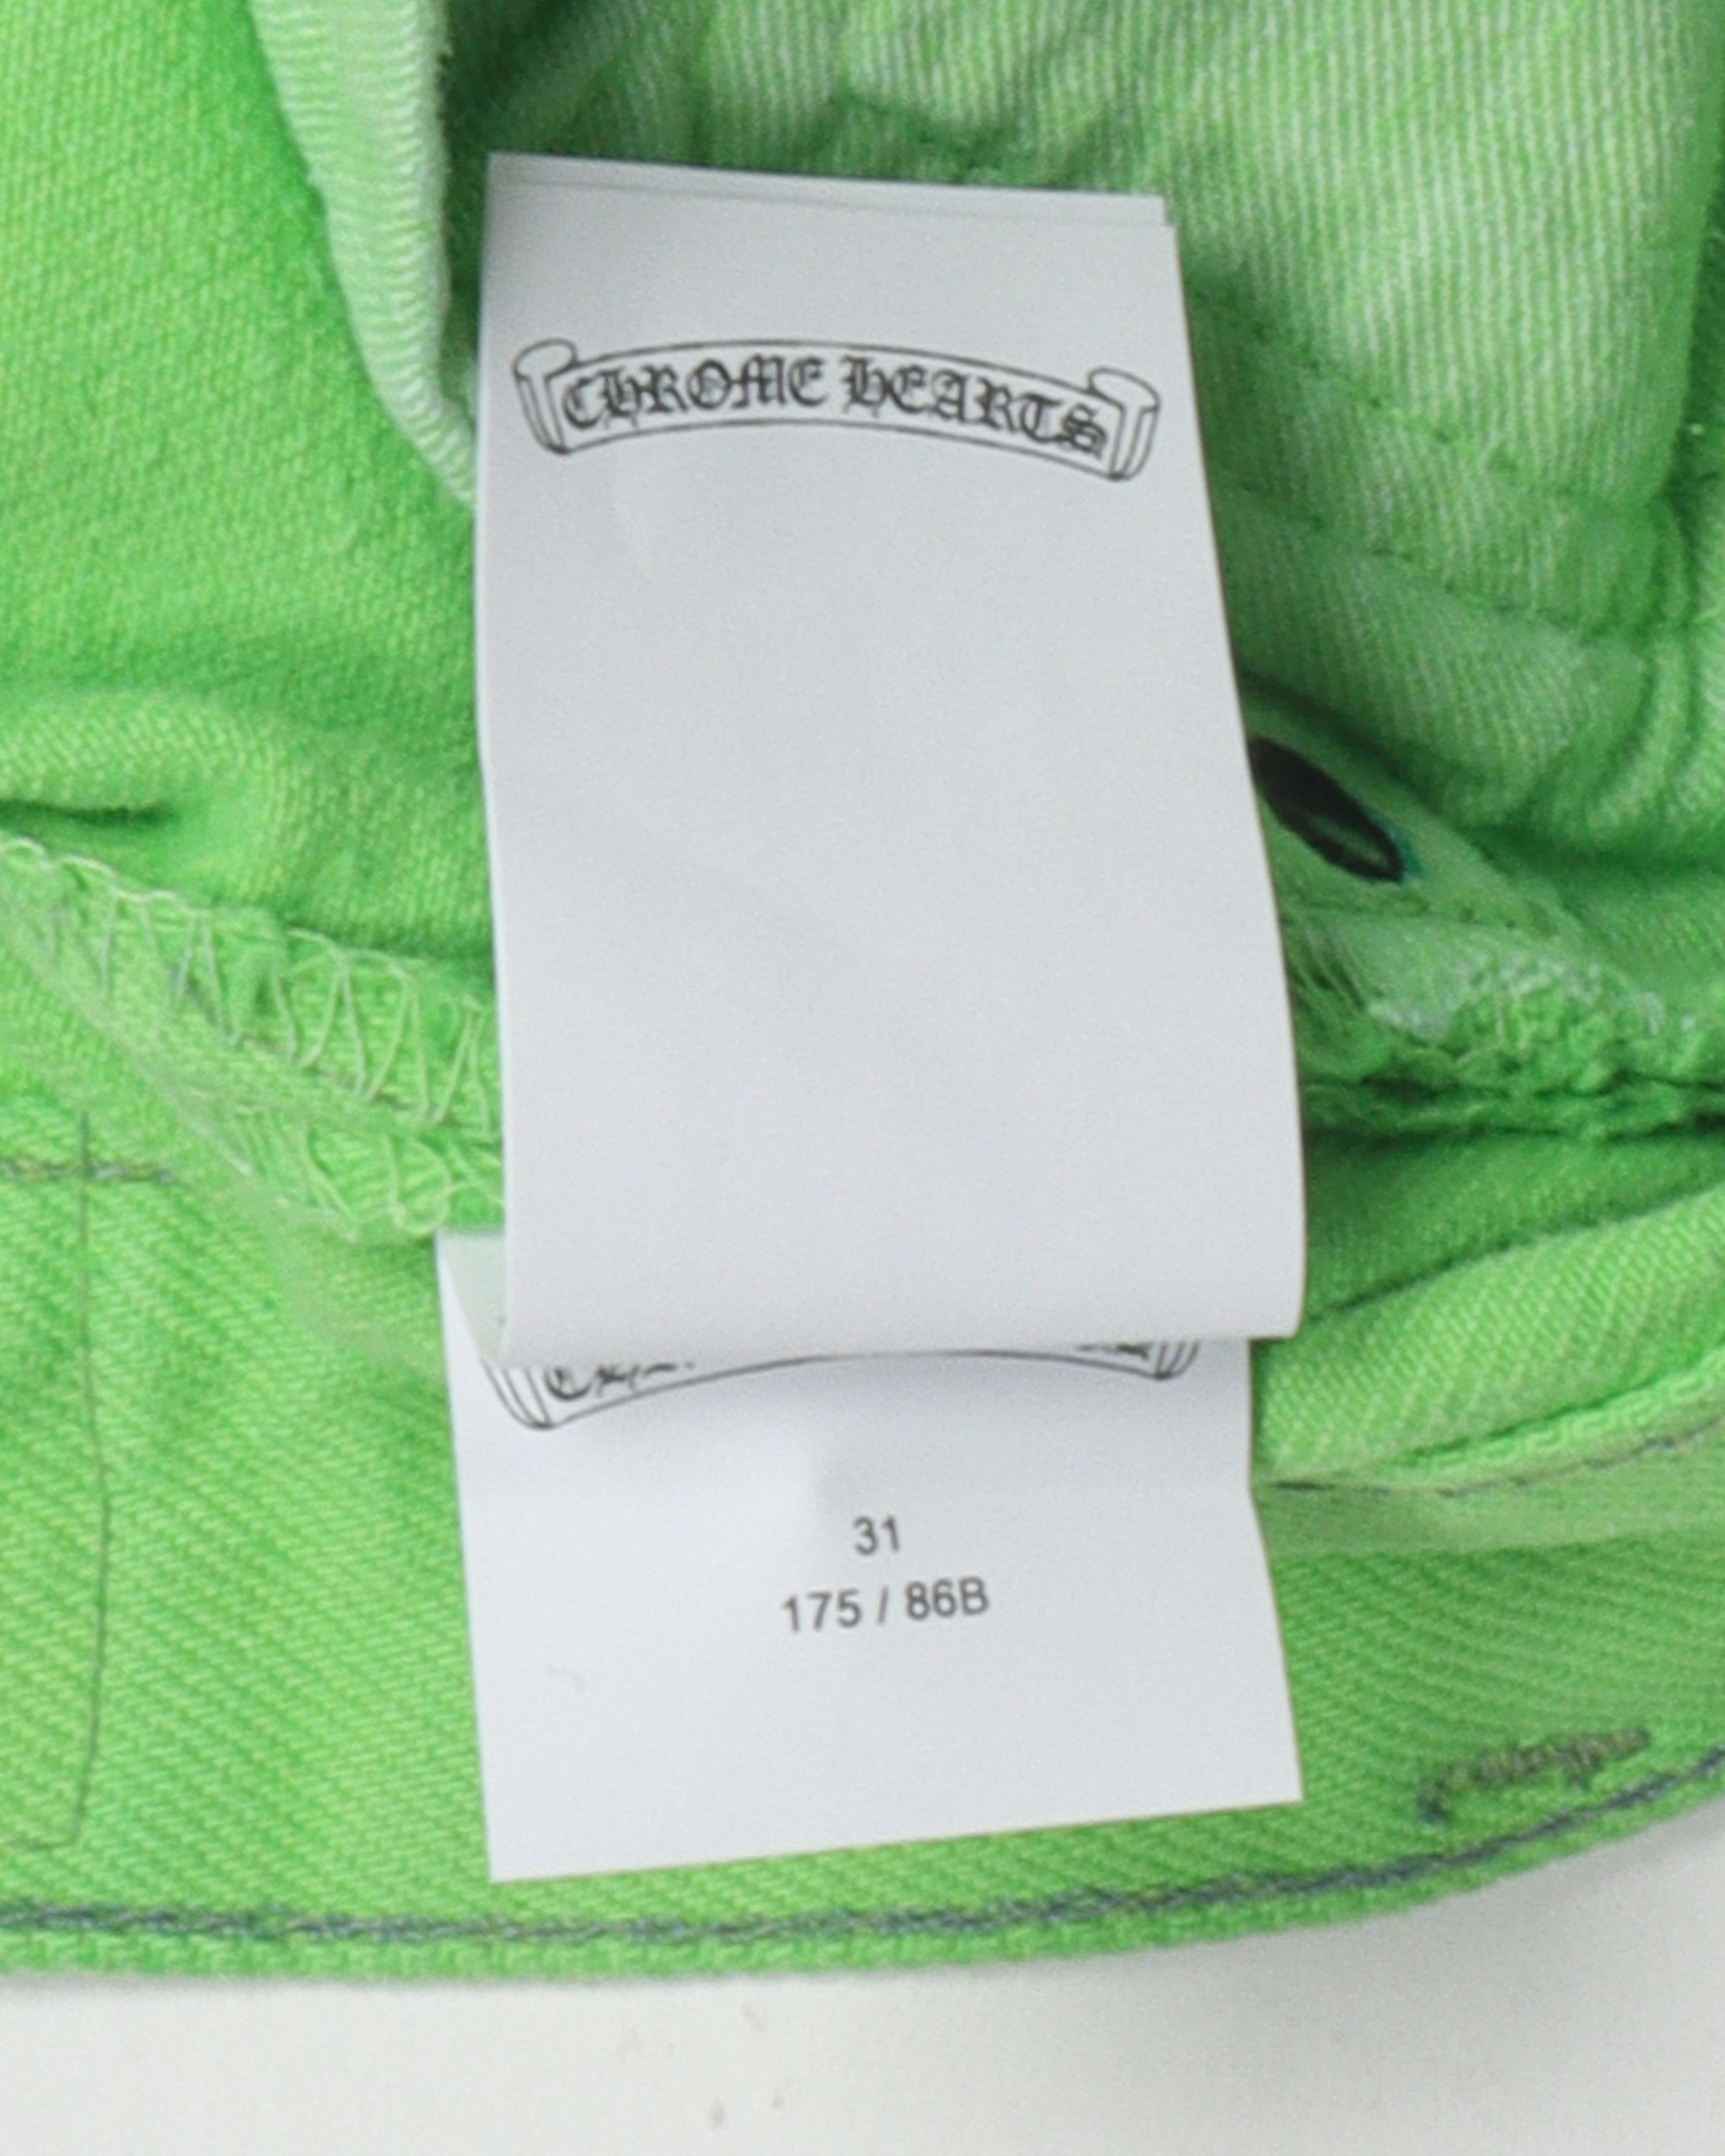 Sex Records Green Cross Jeans